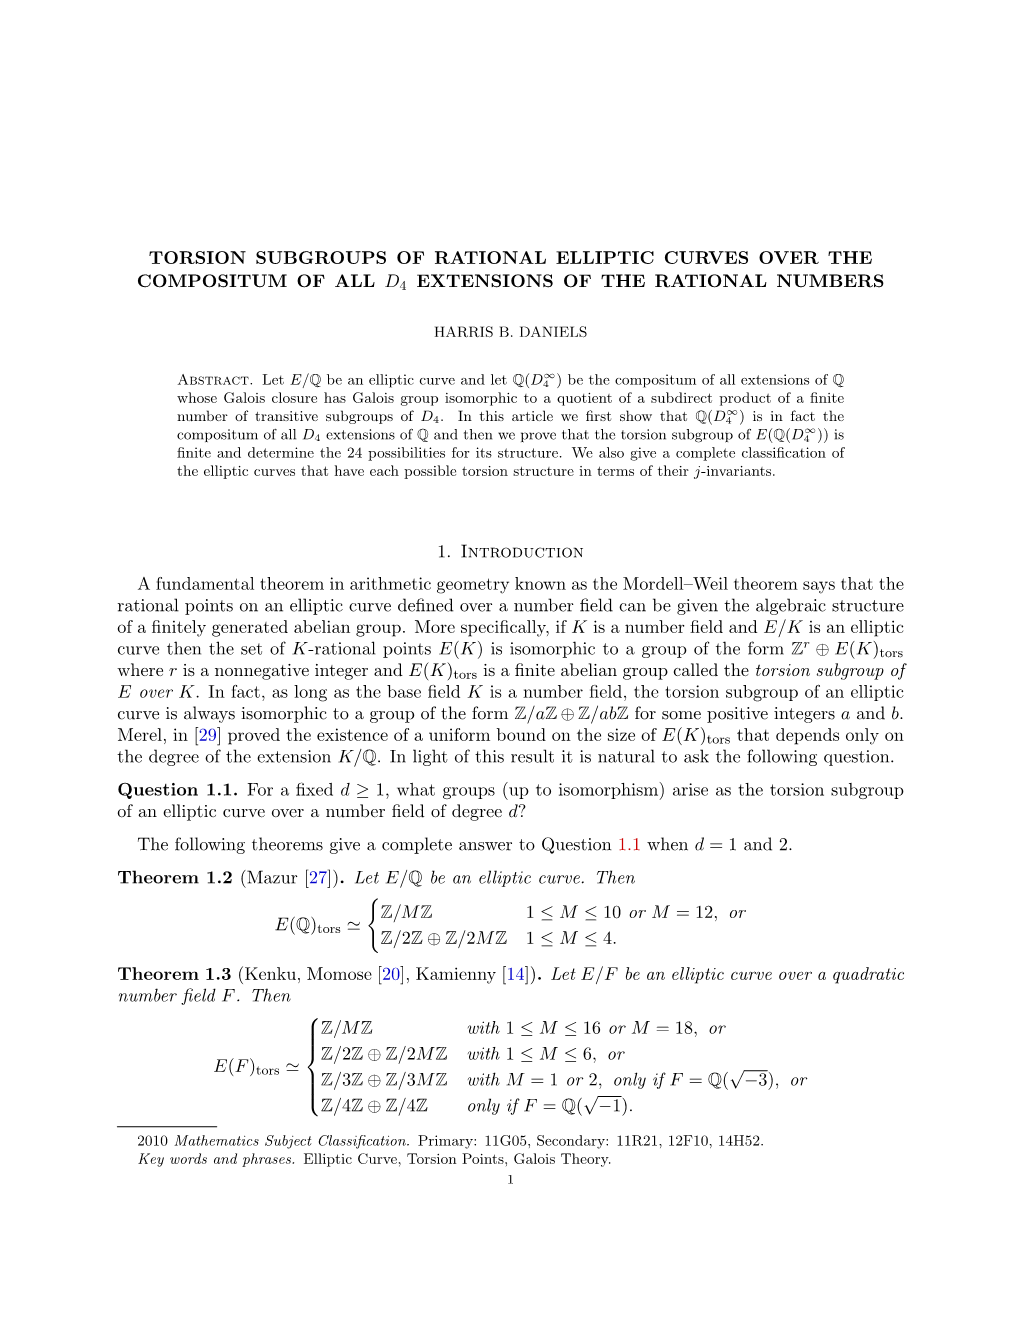 Torsion Subgroups of Rational Elliptic Curves Over the Compositum of All D4 Extensions of the Rational Numbers